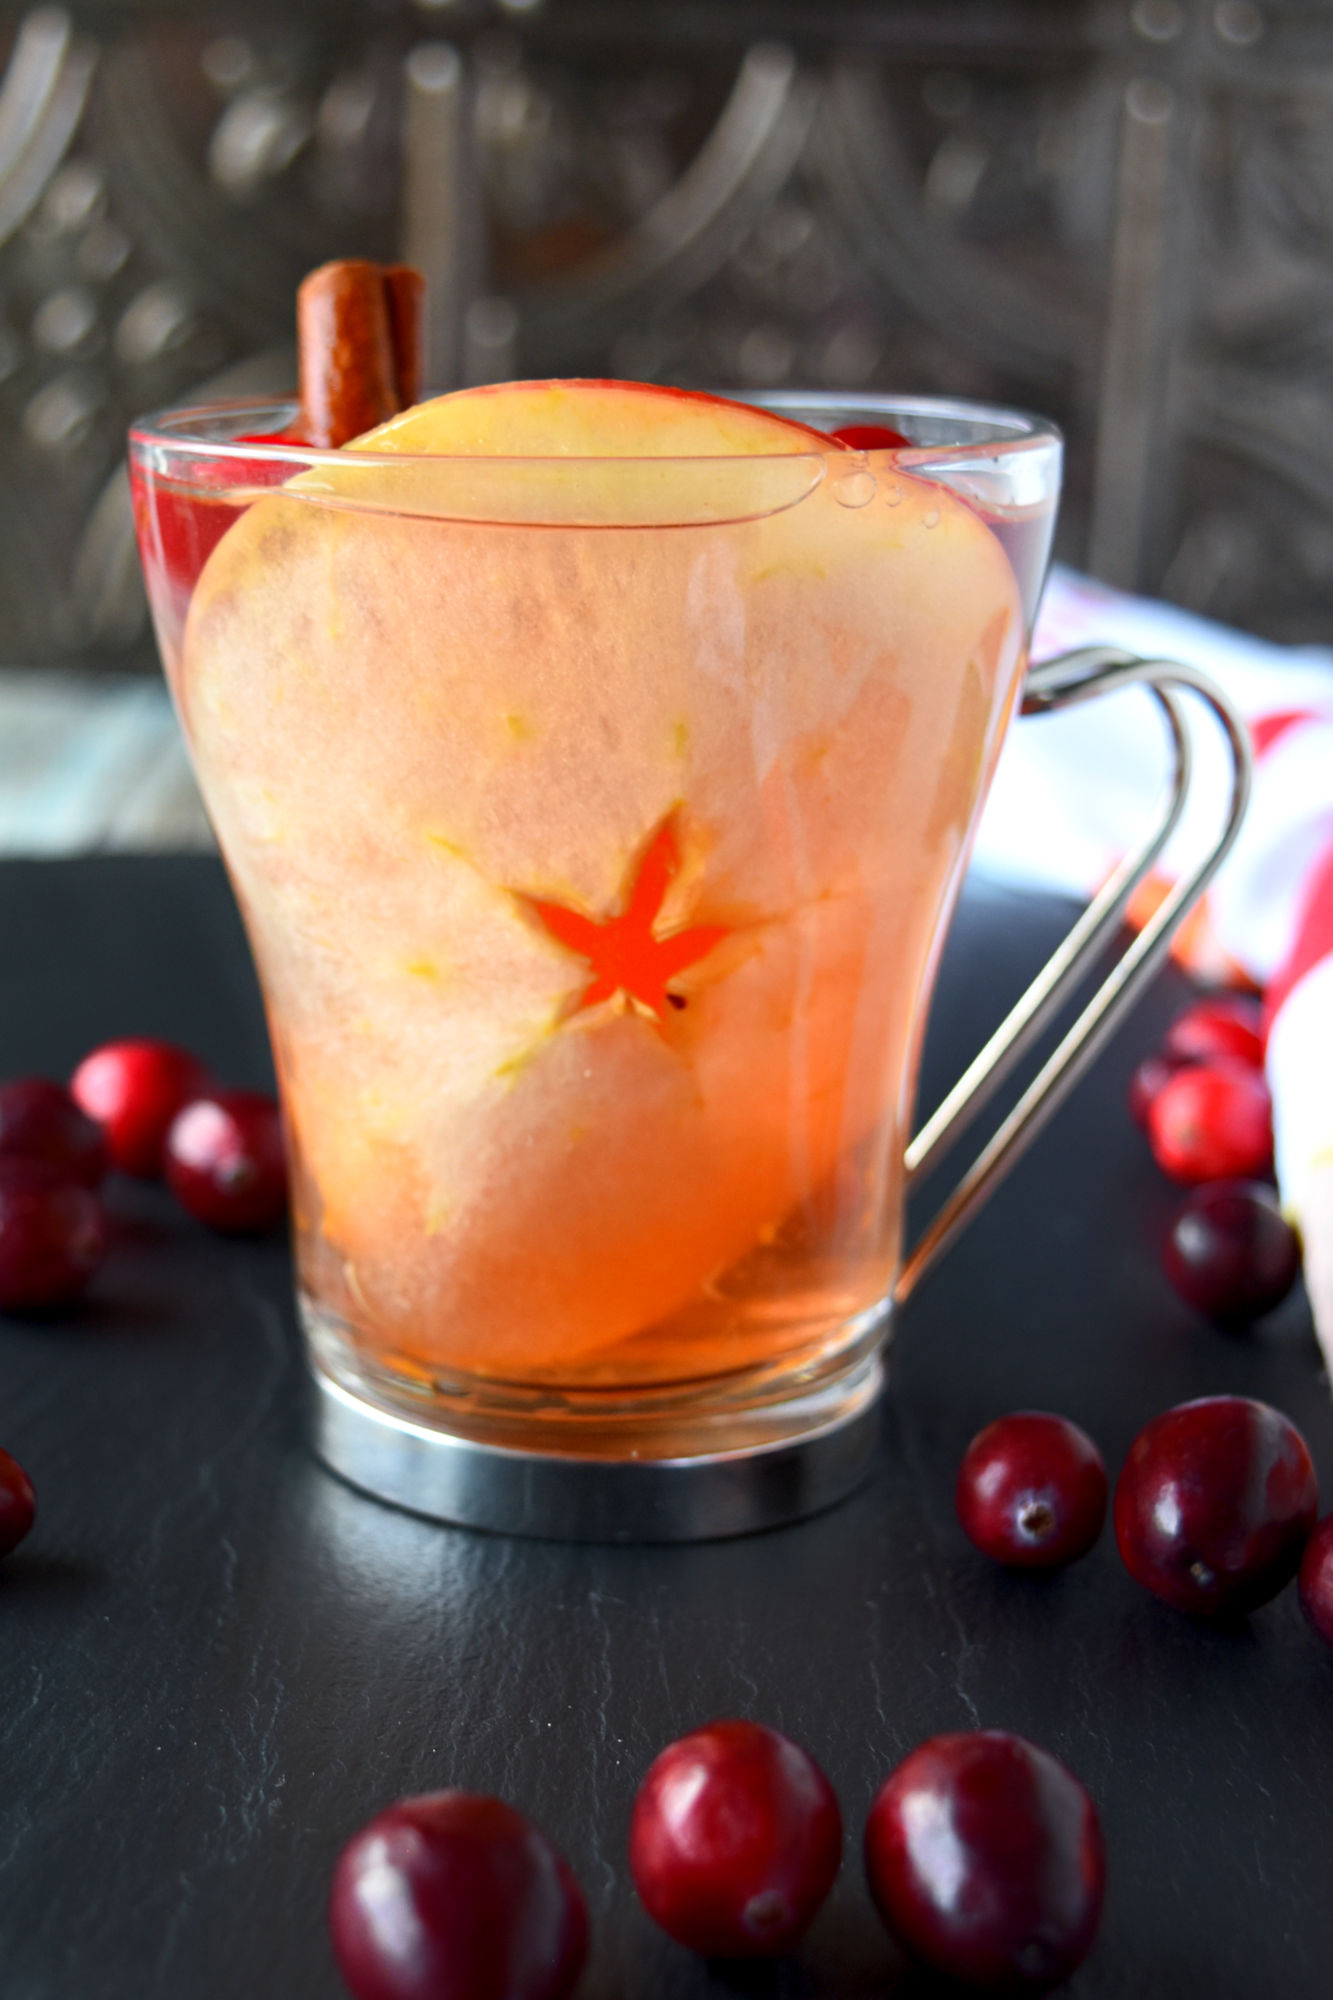 Looking to add a touch of elegance and flavor to your upcoming holiday gathering? This cranberry spiced sangria recipe will leave your guests begging for the recipe and asking for seconds. #CranberryWeek #sangria #wintersangria #spicedsangria #rosesangria
